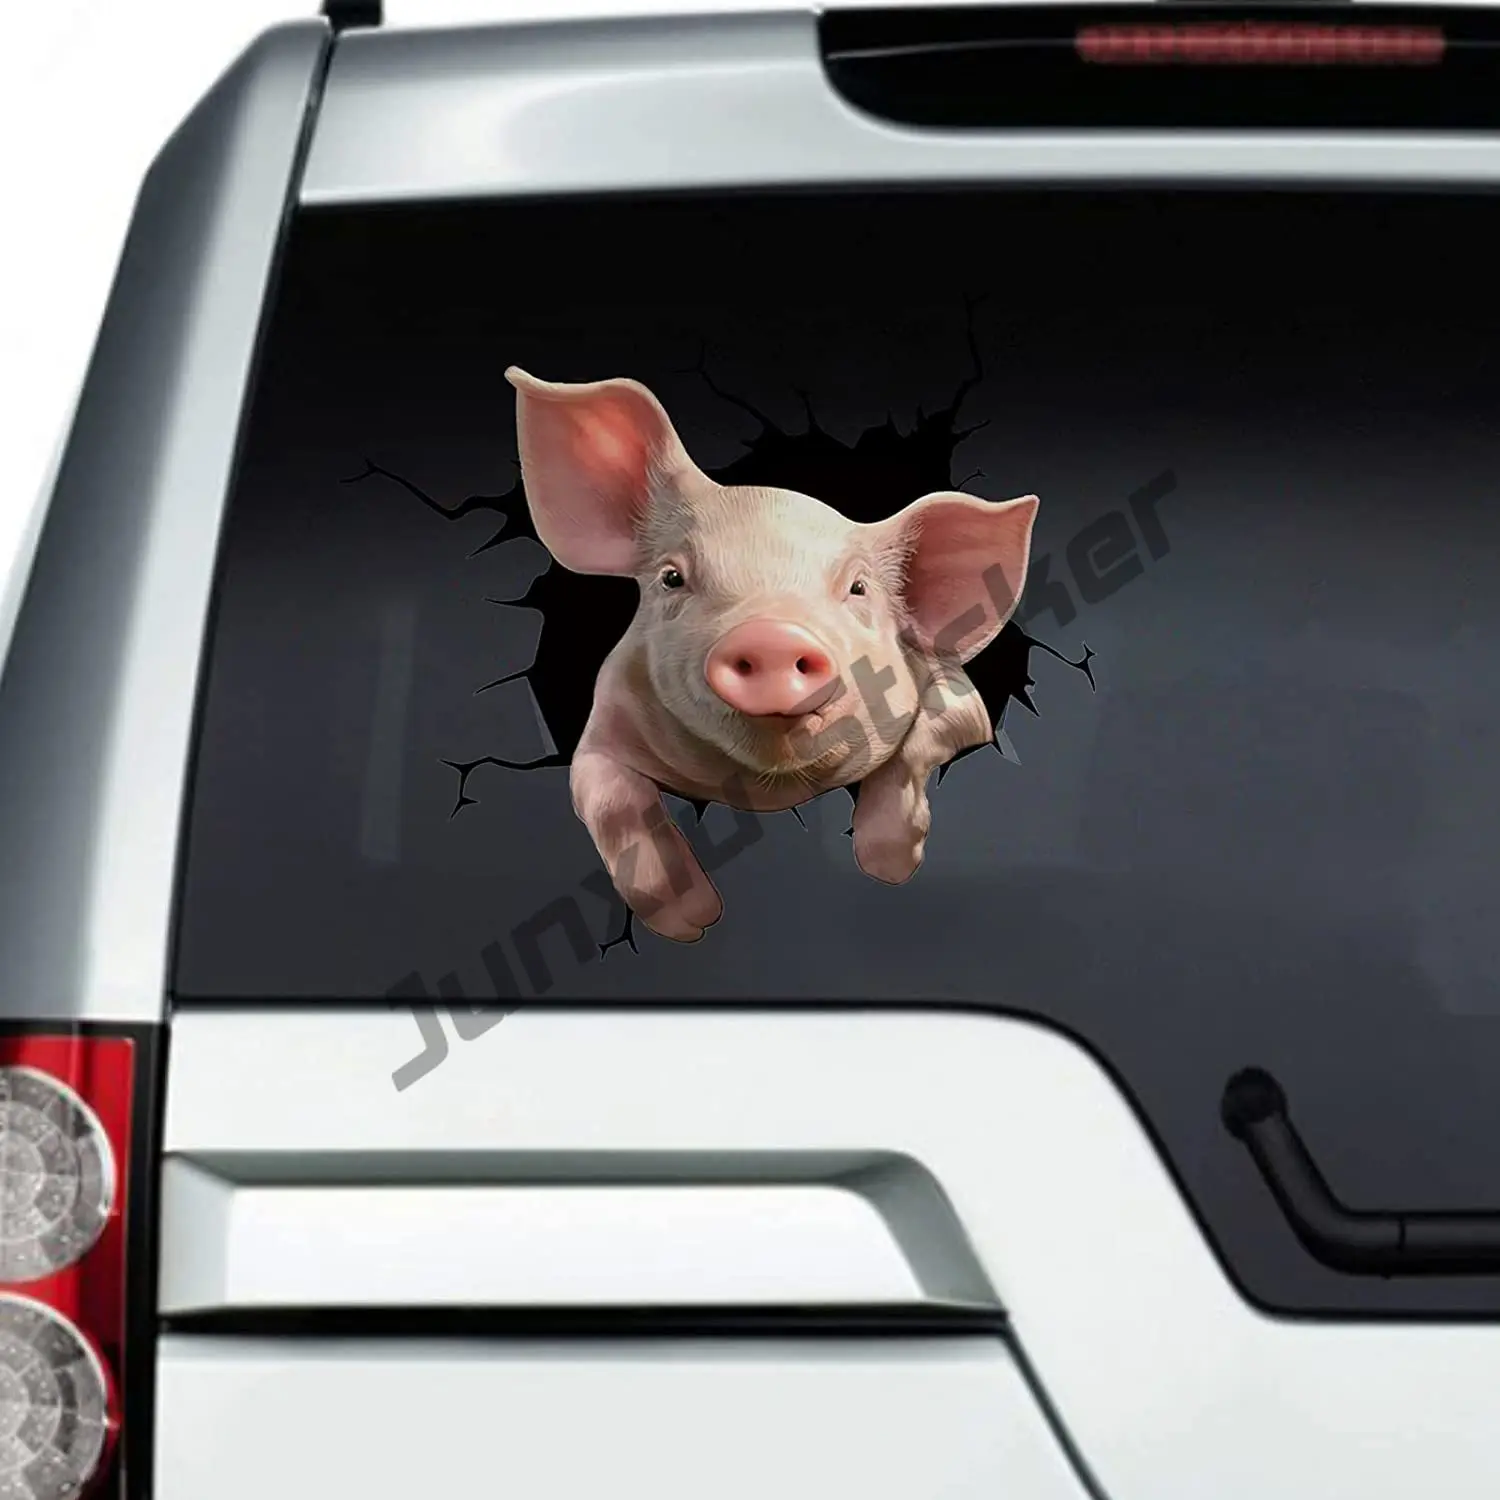 

Animal 3D Pig Crack Car Sticke Car Window Decal Pet Static Electricity Sticker for Cars Realistic Waterproof Car Paste Stickers